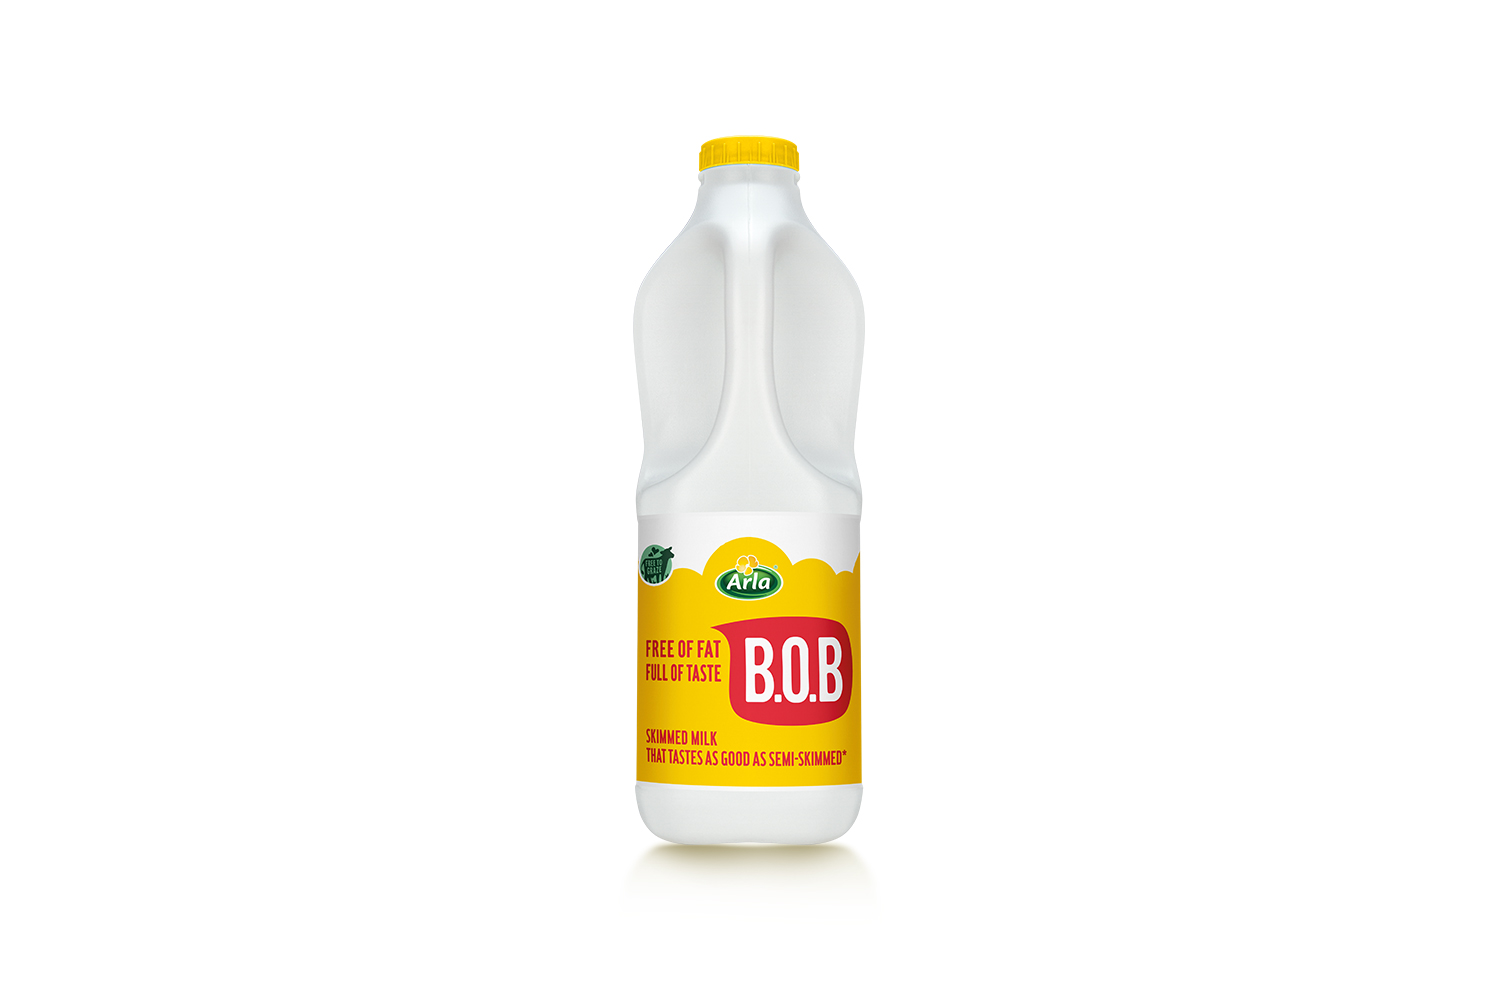 Arla B.O.B skimmed milk is a lovely little ray of sunshine in the dairy aisle, a fat free skimmed milk that tastes as full flavoured as semi skimmed.